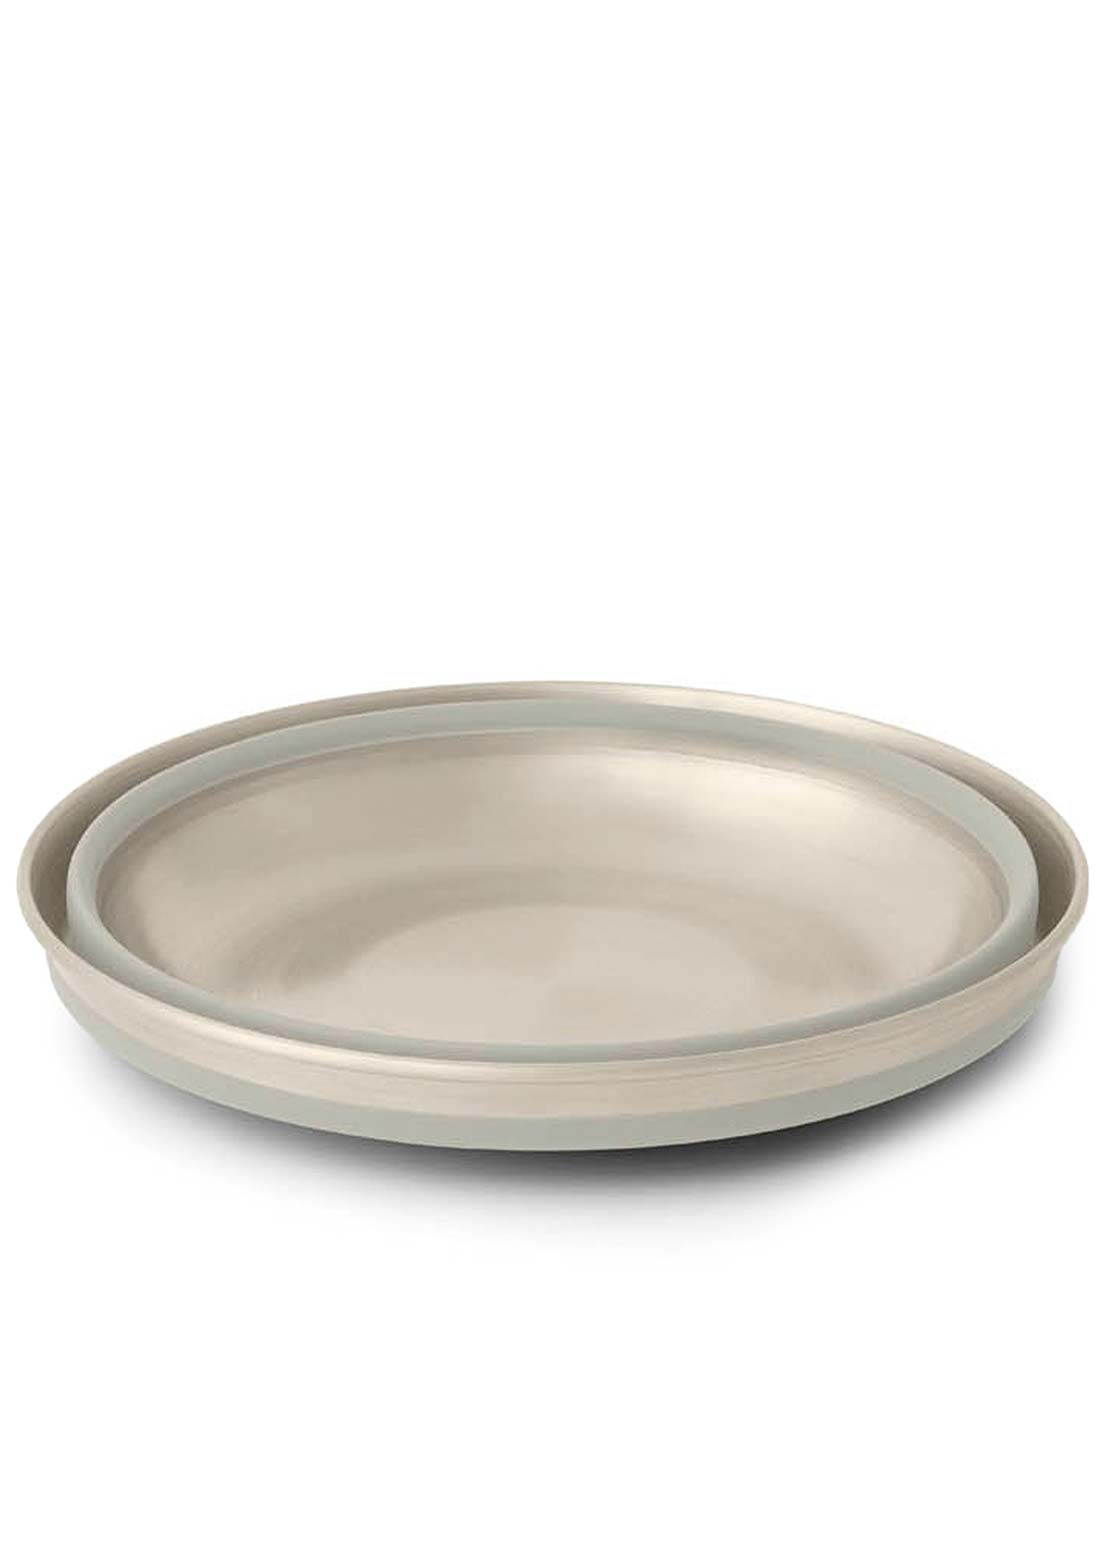 Sea To Summit Detour Stainless Steel Bowl Moonstruck Grey